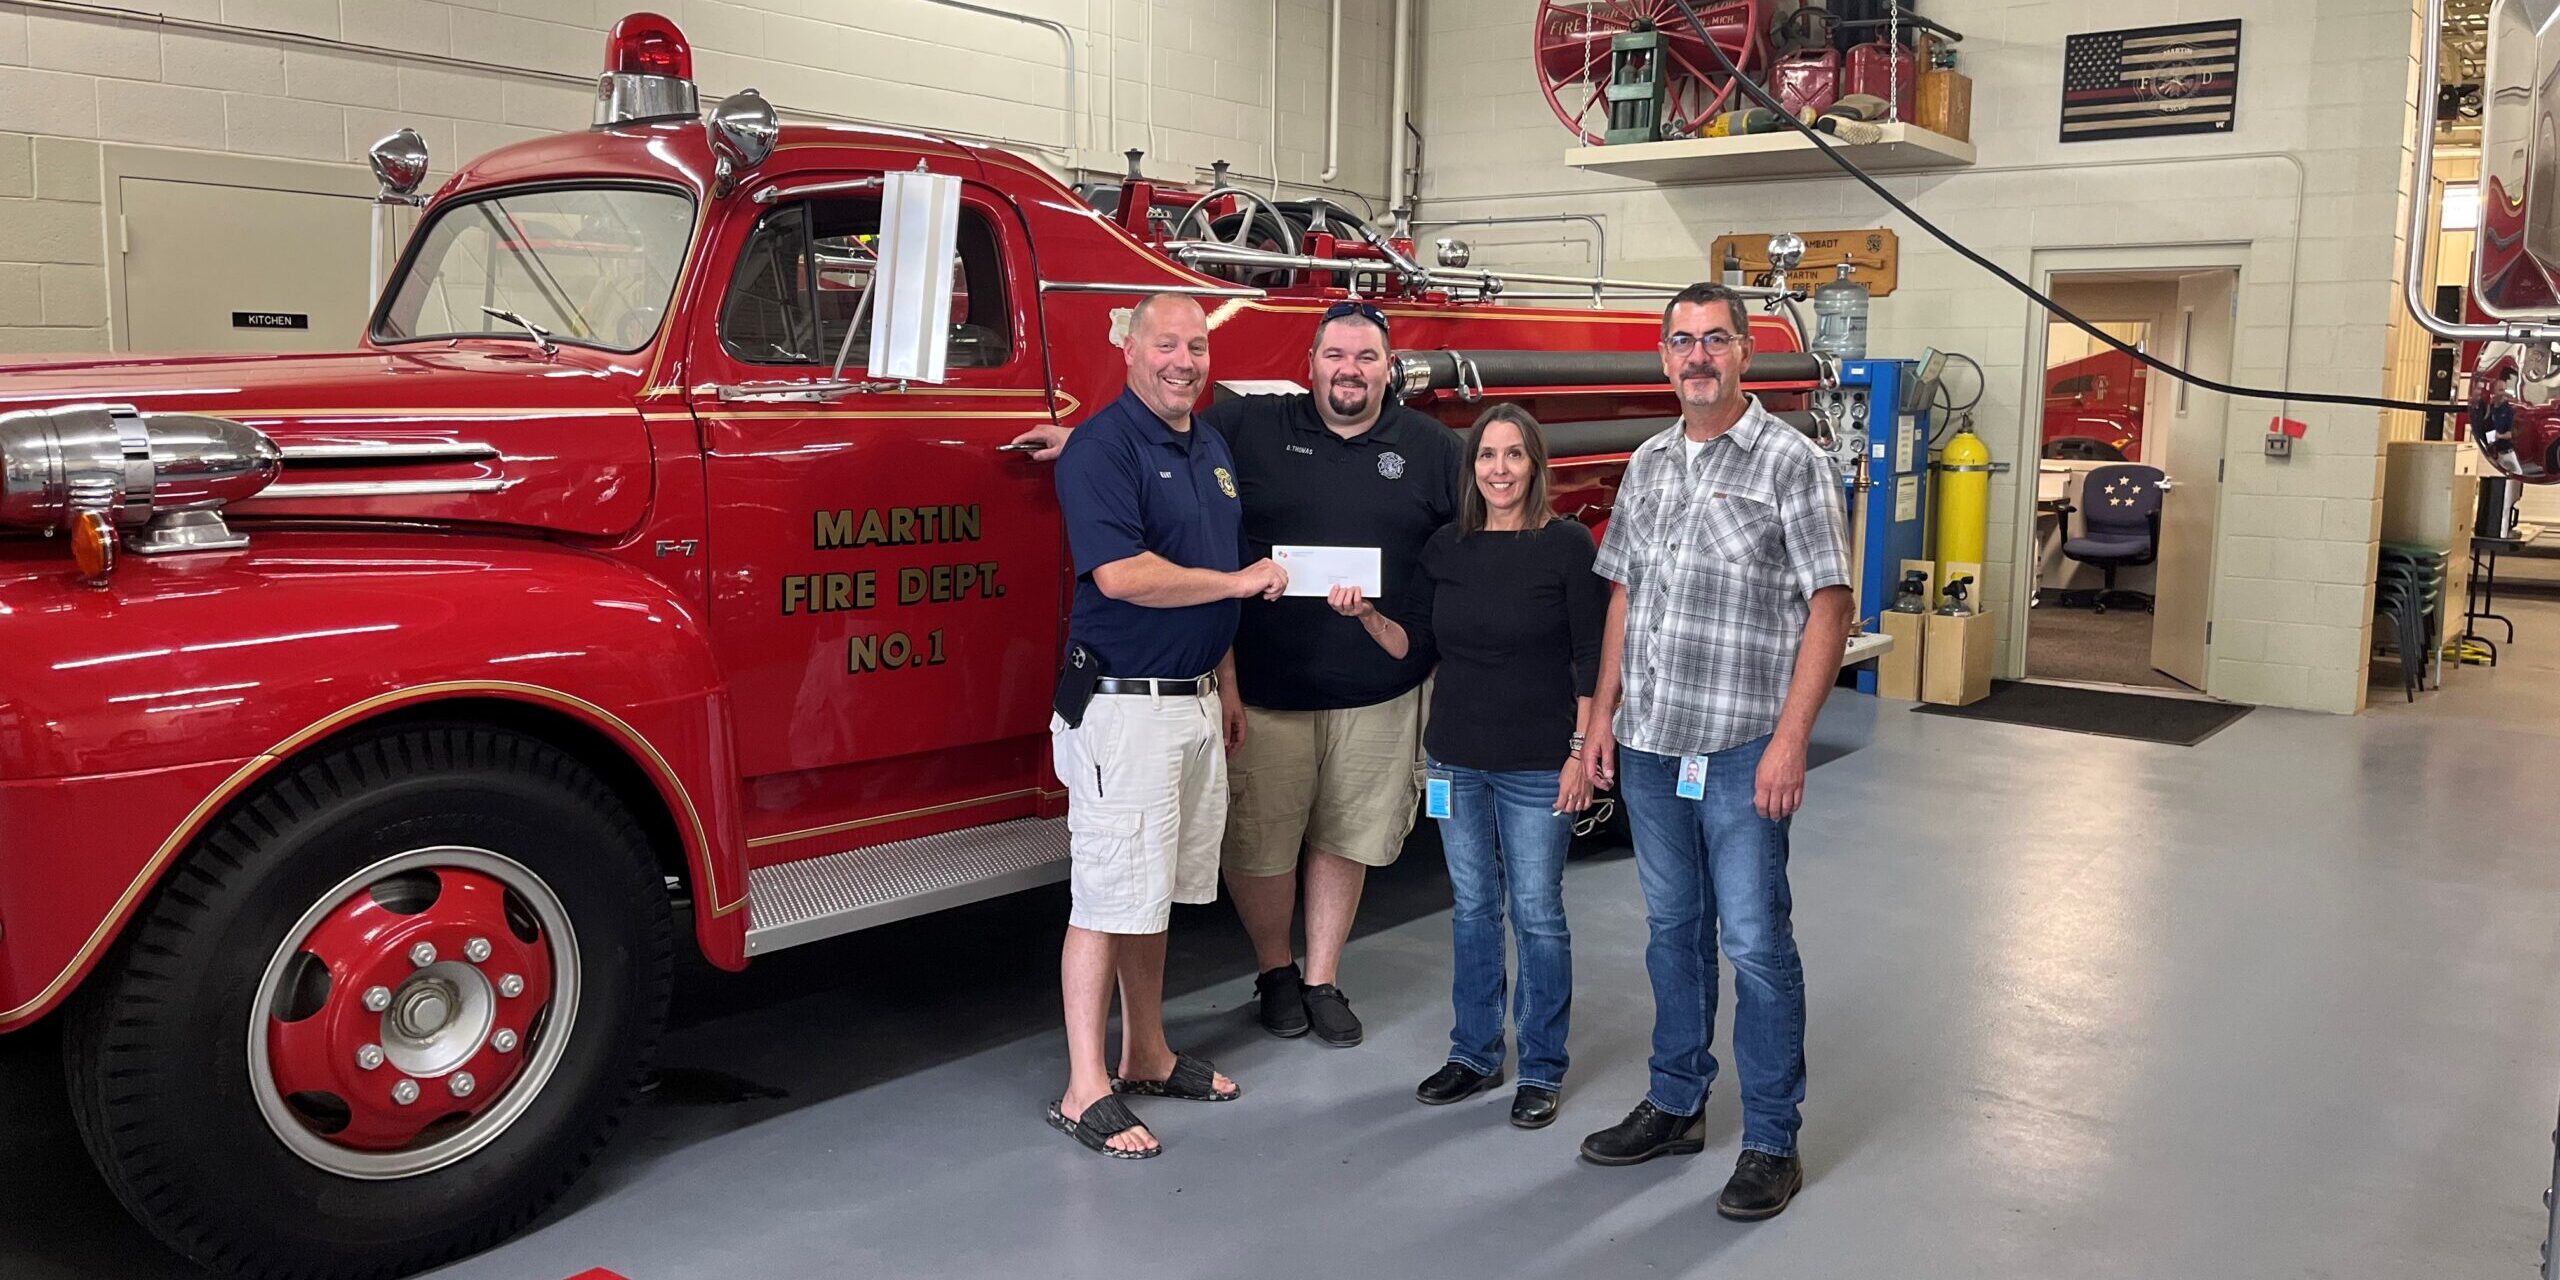 Two male firefighters receive a grant check from a man and woman with MGU in front of a fire engine.